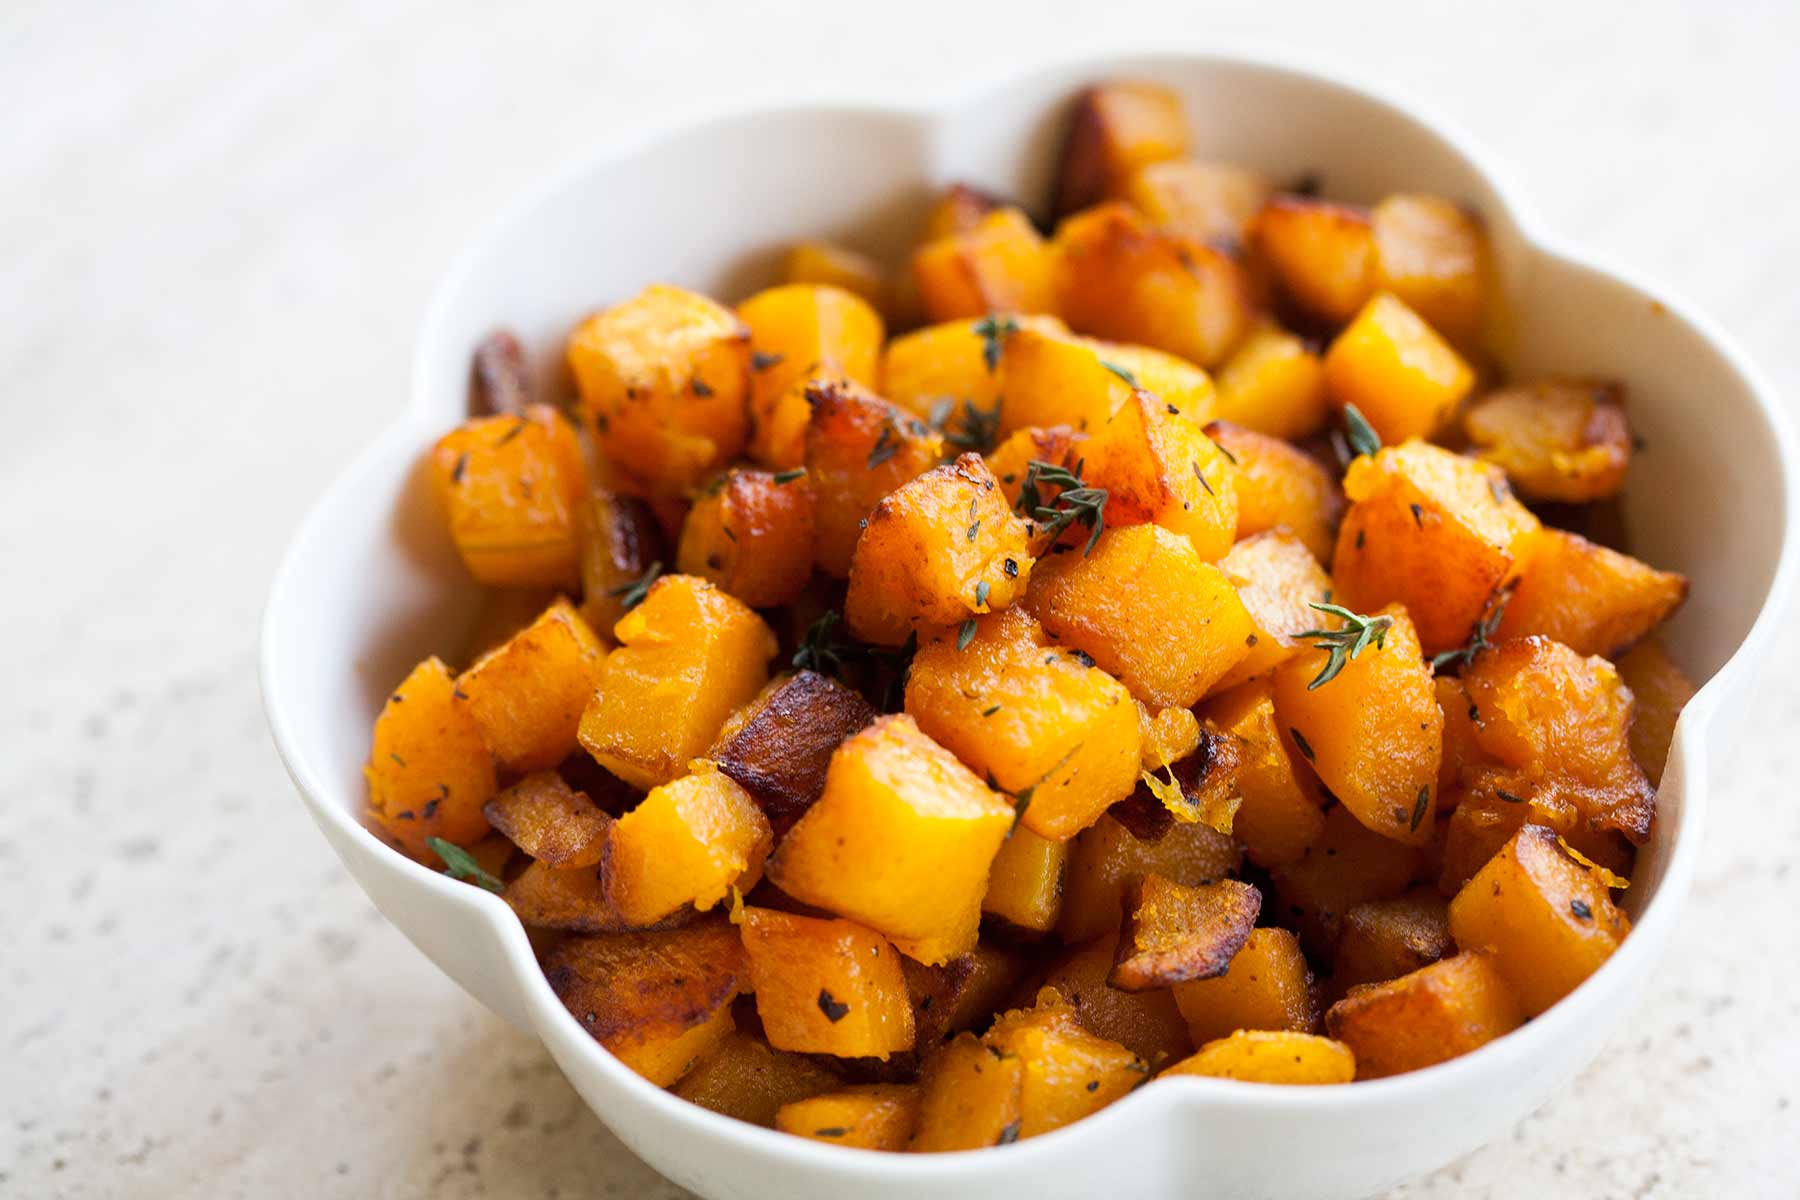 The Top 3 Ways to Prepare Butternut Squash